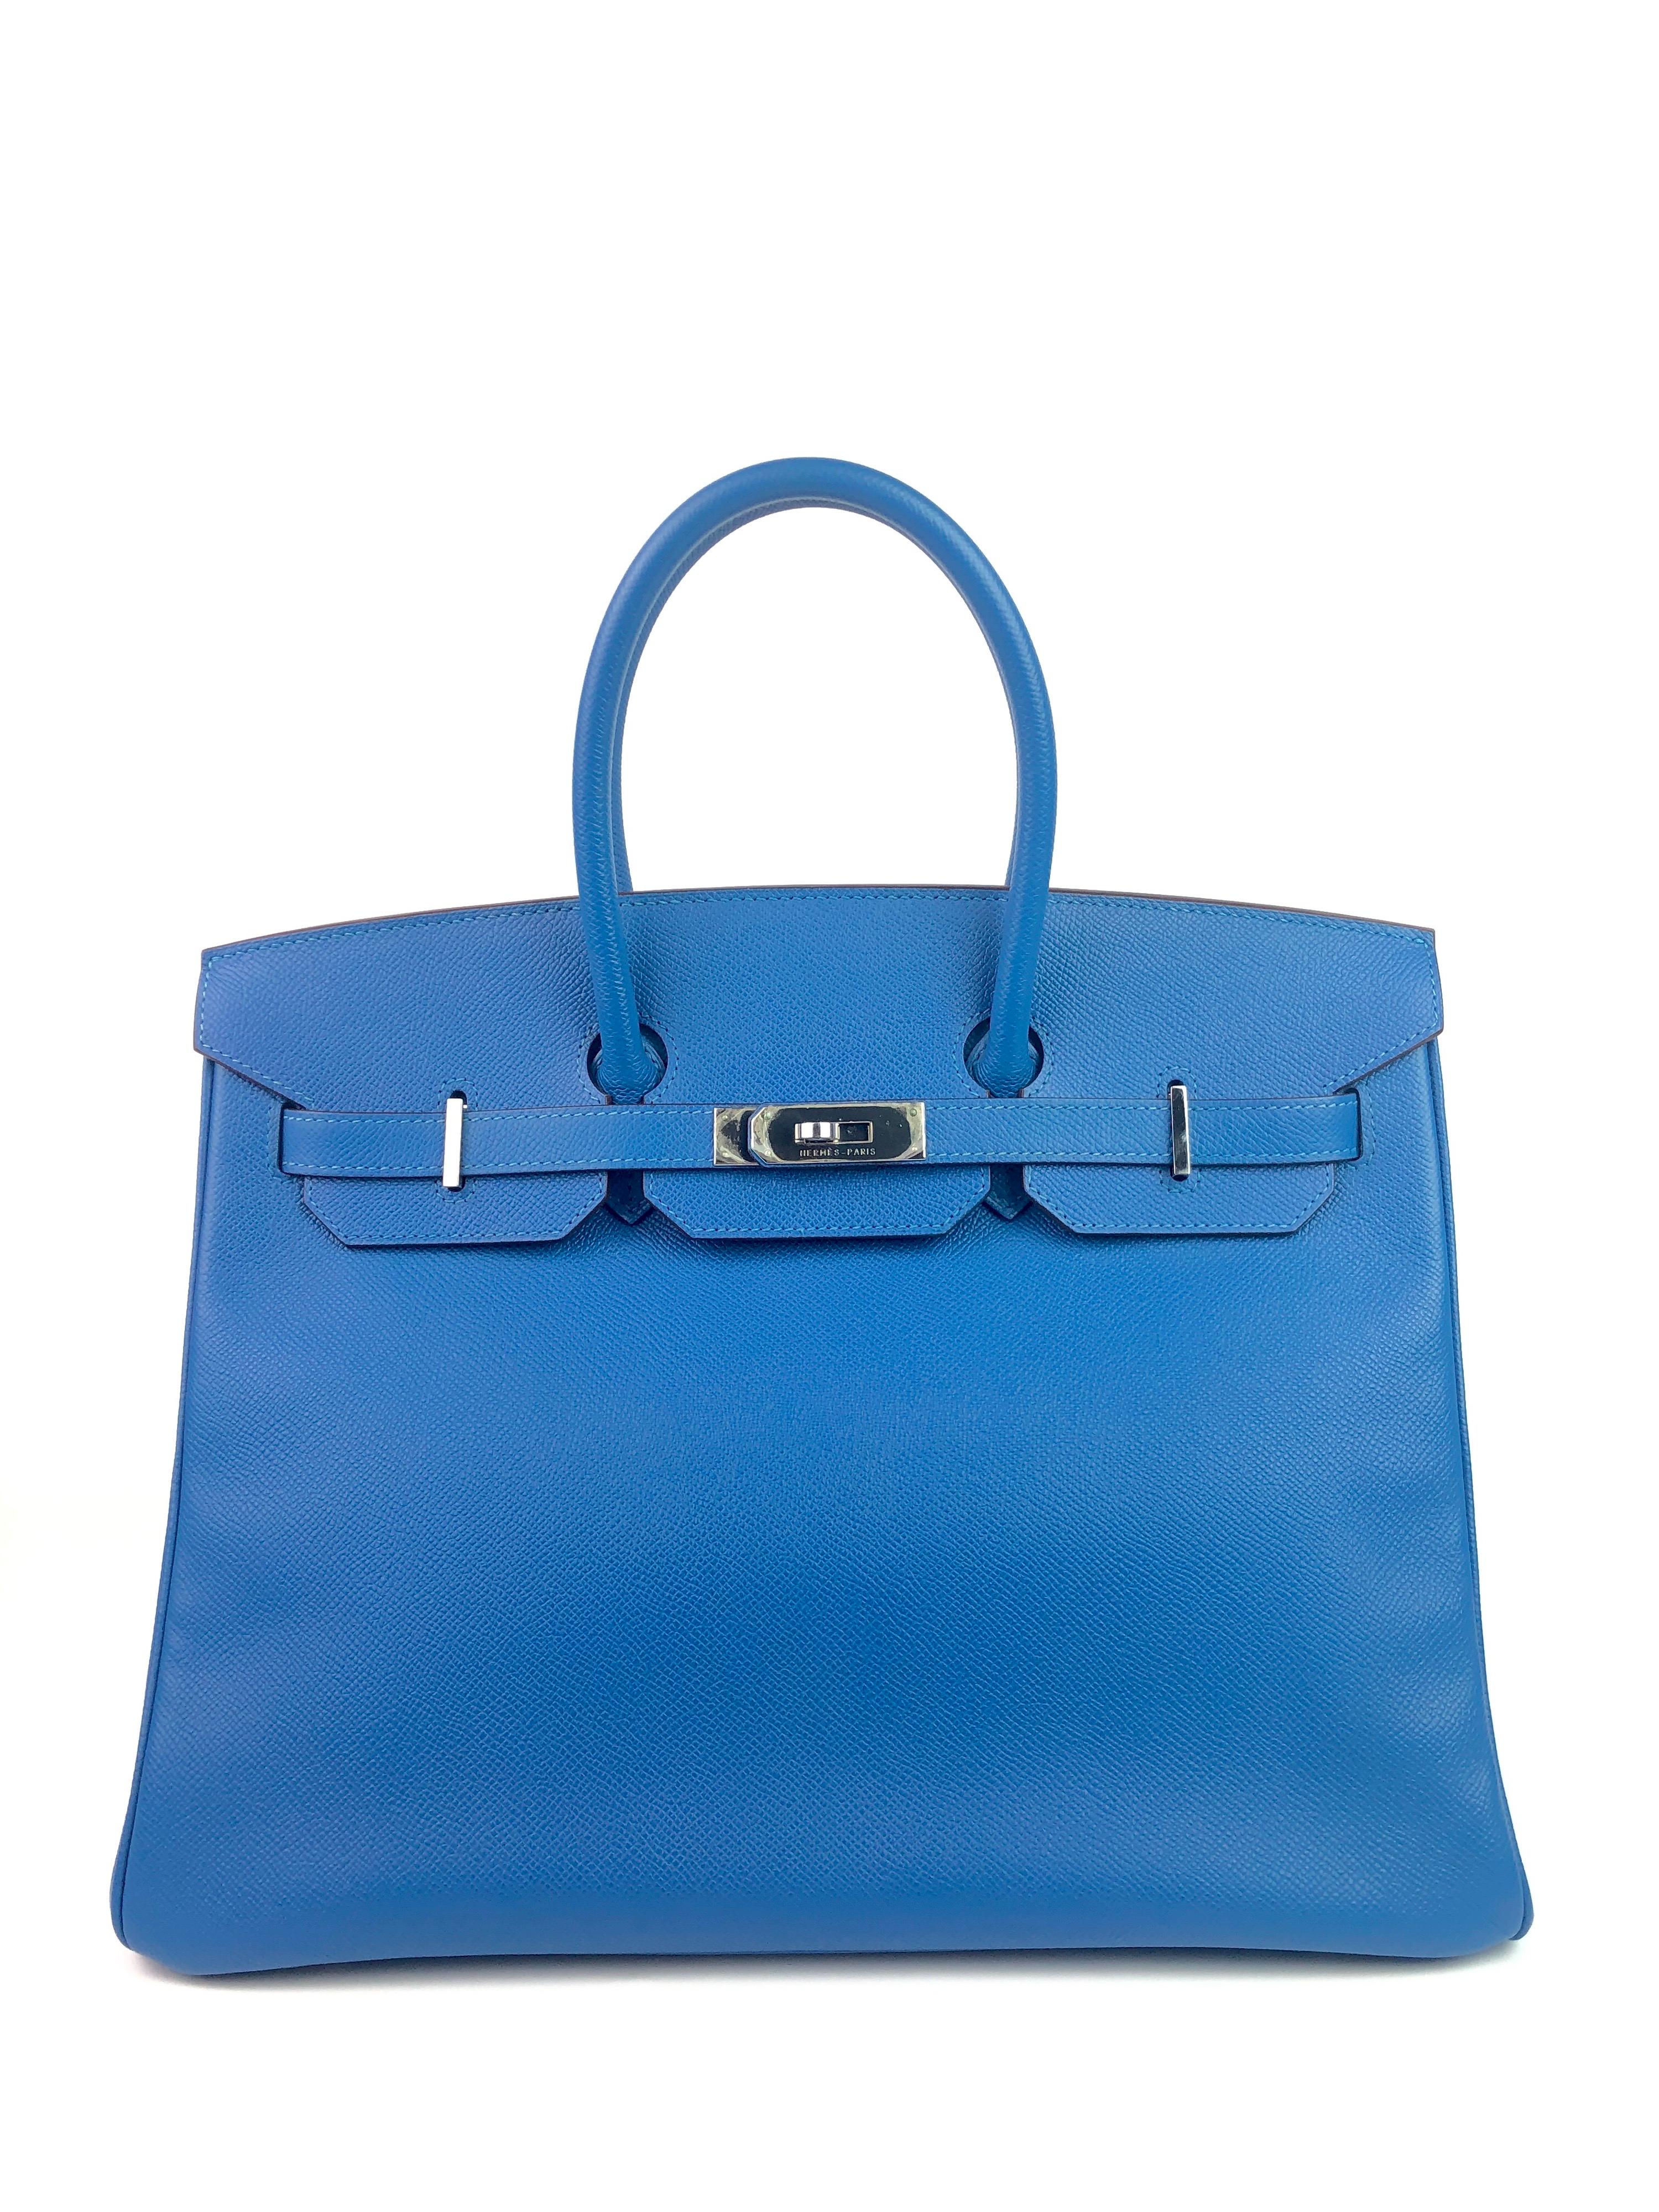 HERMES BIRKIN 35 BLUE MYKONOS EPSOM PALLADIUM HARDWARE.  Pristine condition with Plastic on Hardware and Feet, perfect corners and structure. 

Shop with Confidence from Lux Addicts. Authenticity Guaranteed! 